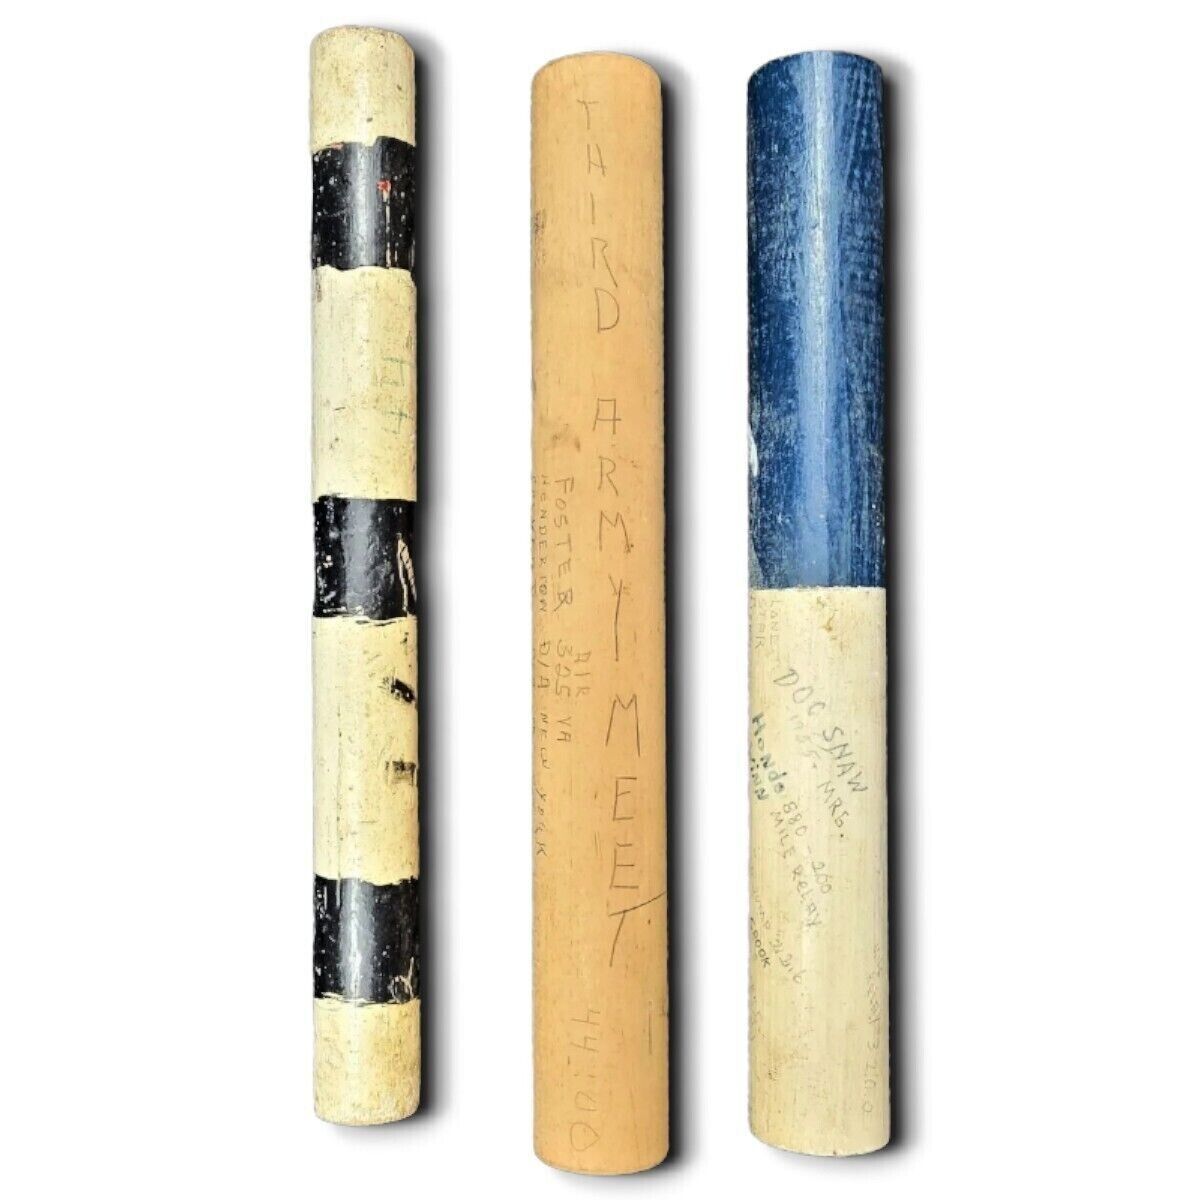 US Army Relay Race Batons Set of 3 Wood Meets 1955 1956 1957 Times Names Noted